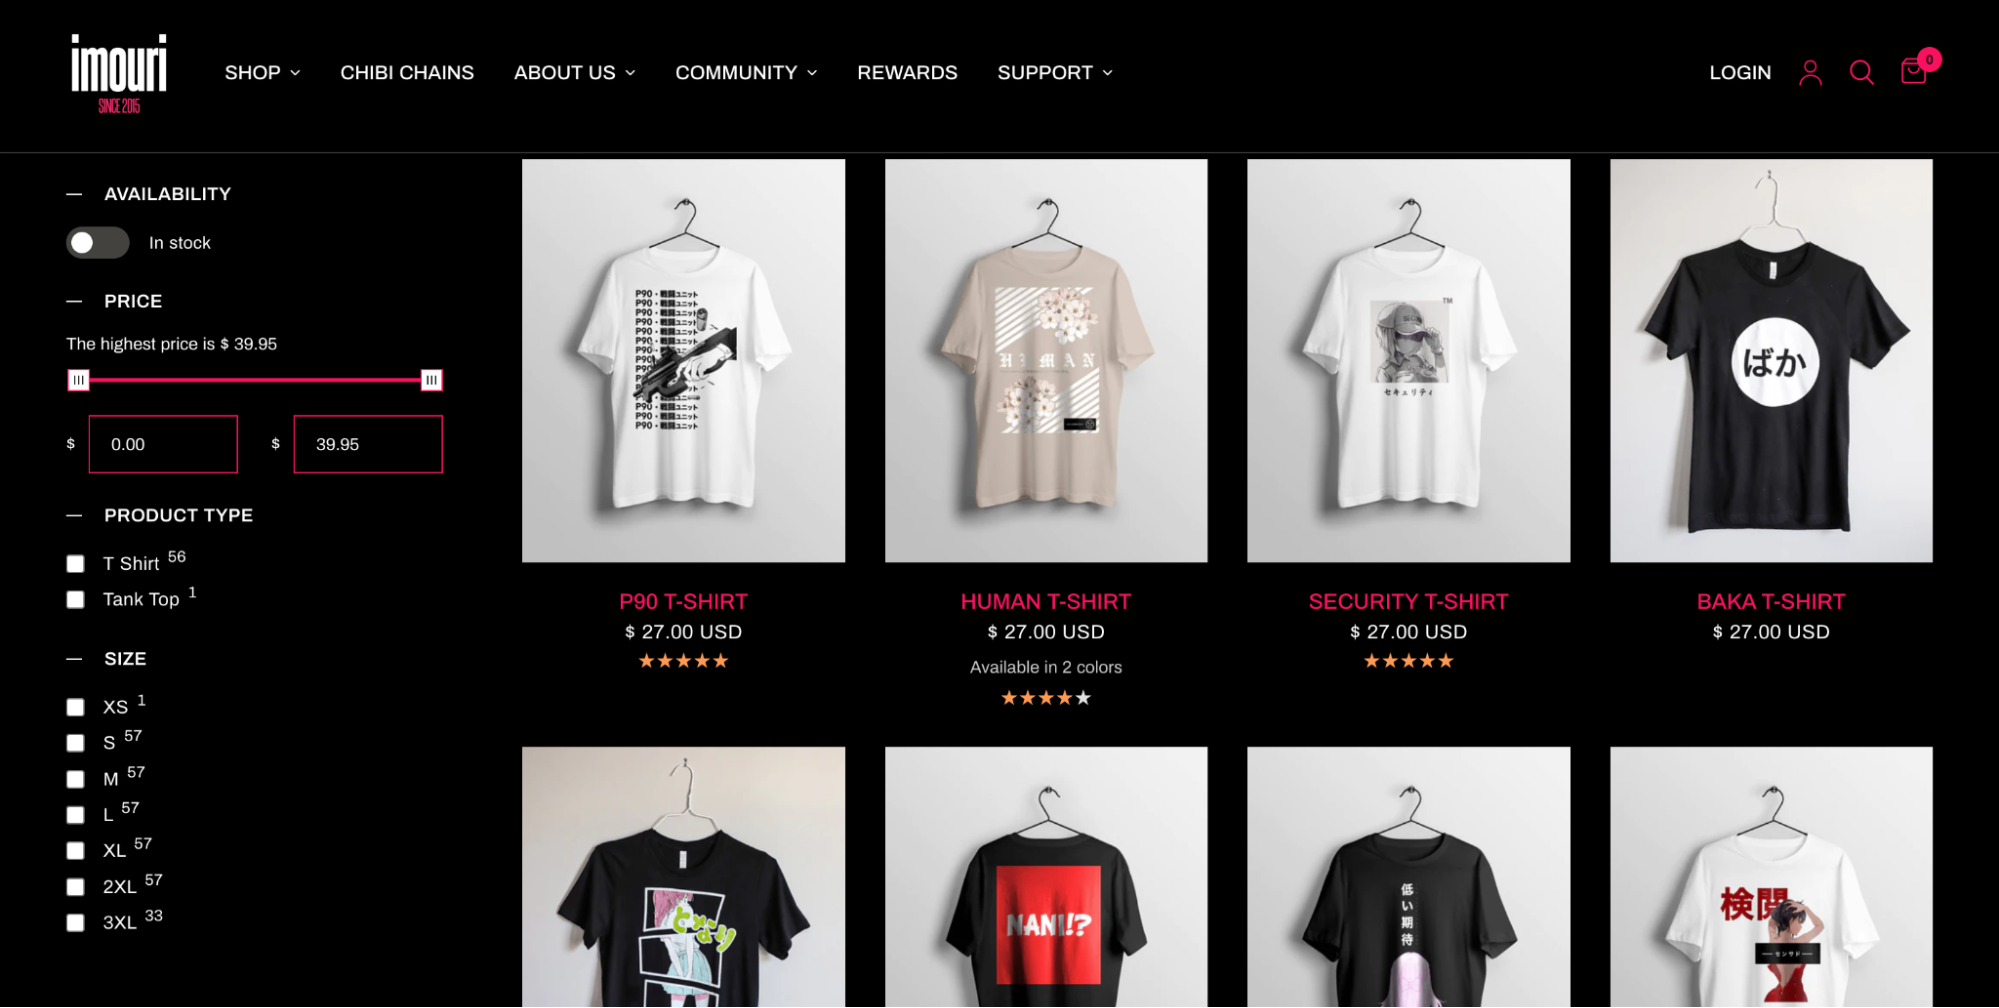 Anime-inspired graphics on eight Imouri t-shirts of various colors, beside an options menu.